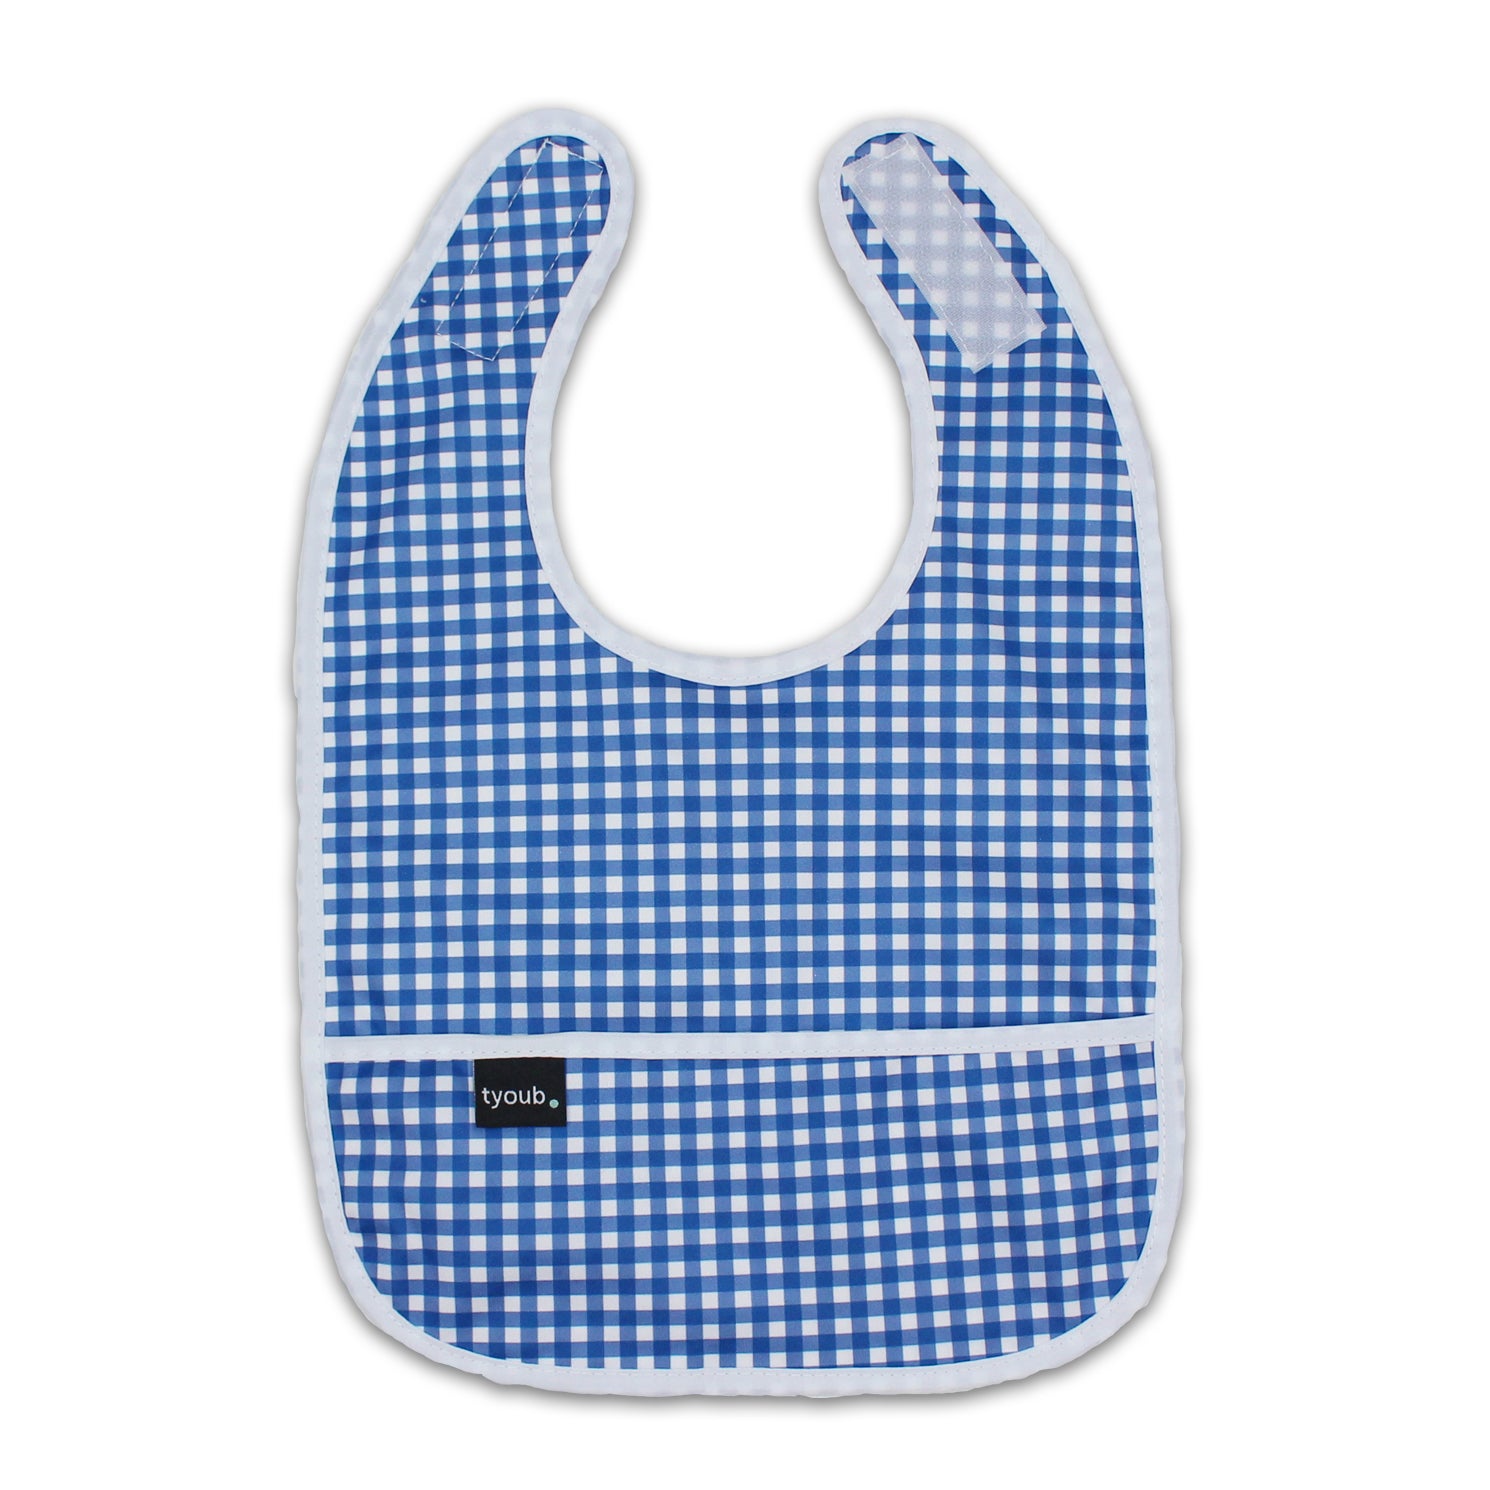 Baby Bib Tyoub Stay-dry Waterproof Fabric– Blue White Gingham Check. For baby feeding and eating, bib covers chest area, keeping baby clean after mealtime. Comfortable with a strong Velcro tab to ensure a comfortable and secure fit, but easy for carer to remove. Gentle and soft on baby skin. Safe and secure our bibs are BPA-free, phthalate-free, PVC-free and lead-free. Unisex design fits infant, baby, toddler boys and girls from 6 months to 24 months.